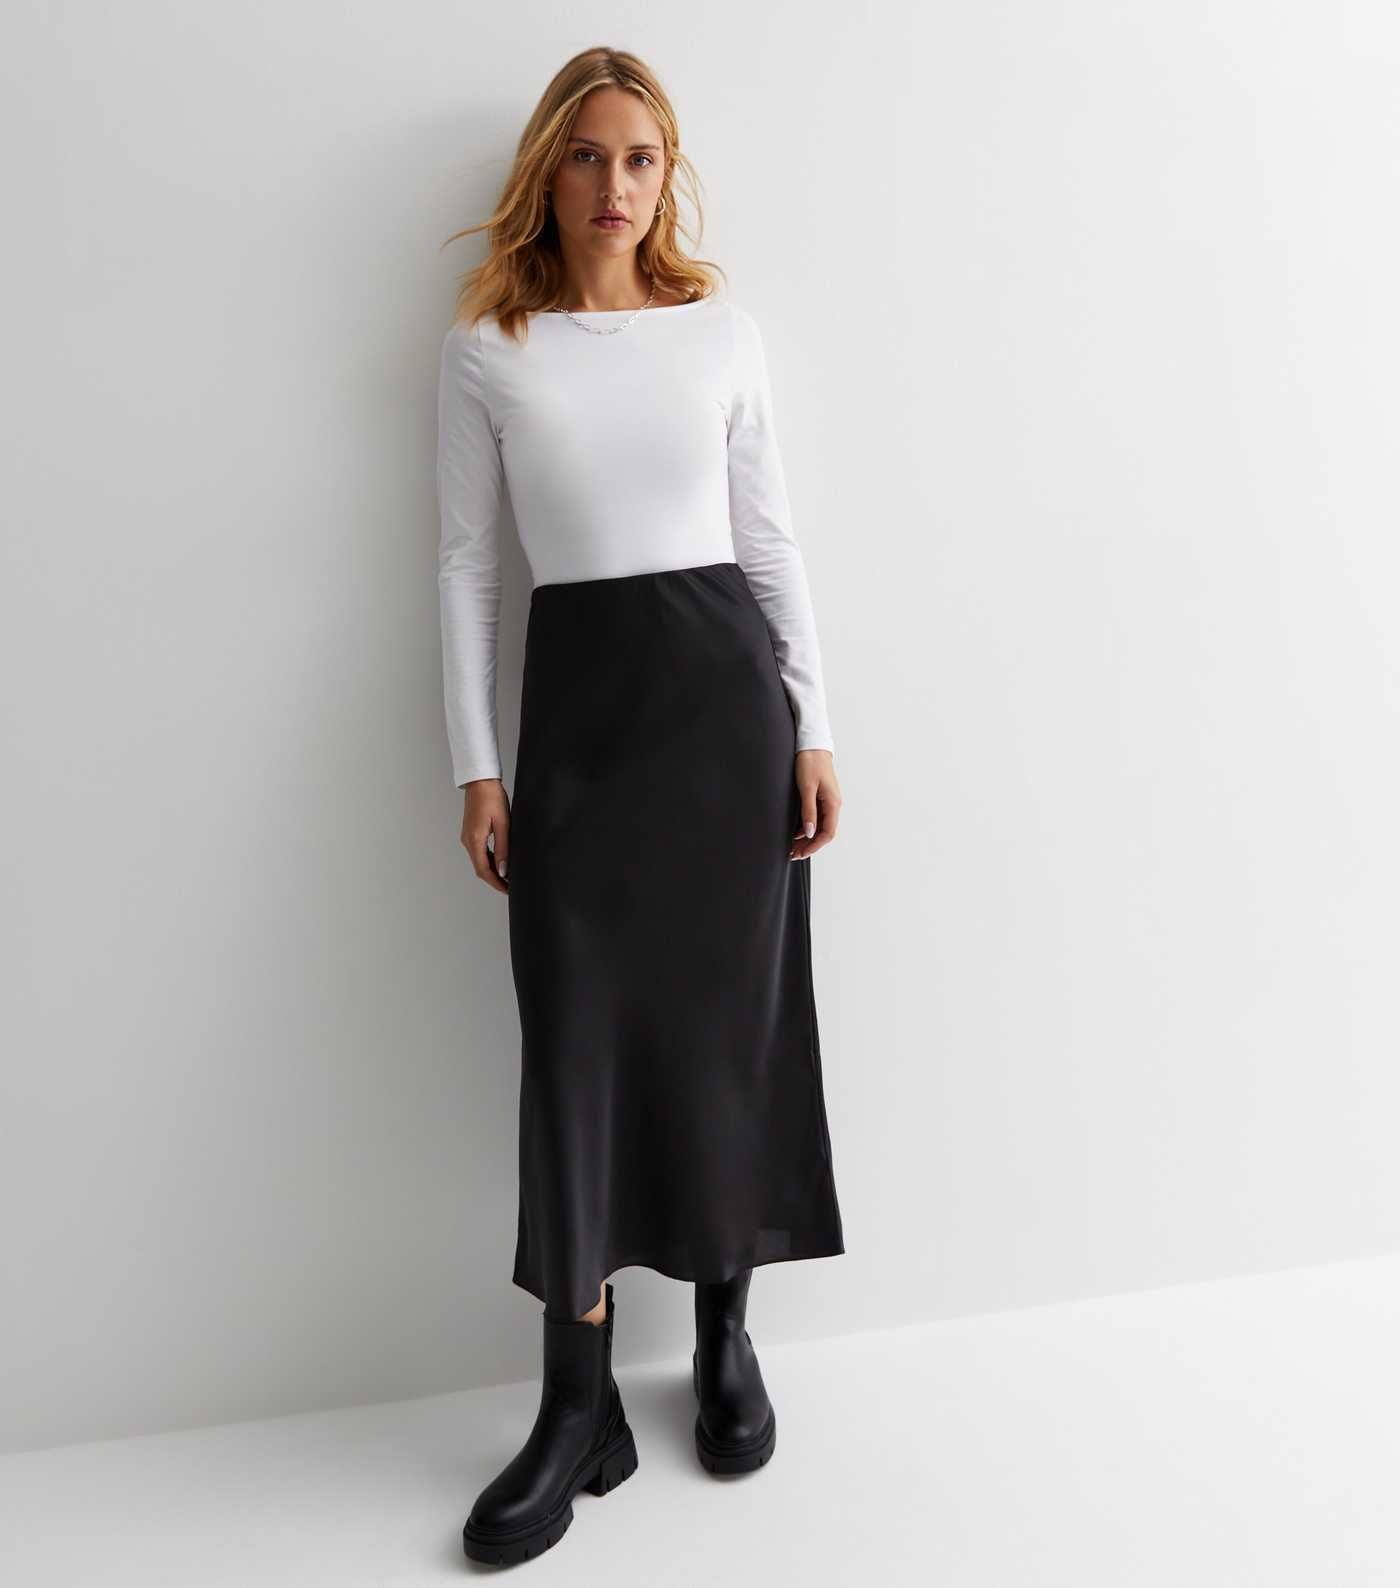 Black Satin Midi Skirt
						
						Add to Saved Items
						Remove from Saved Items | New Look (UK)